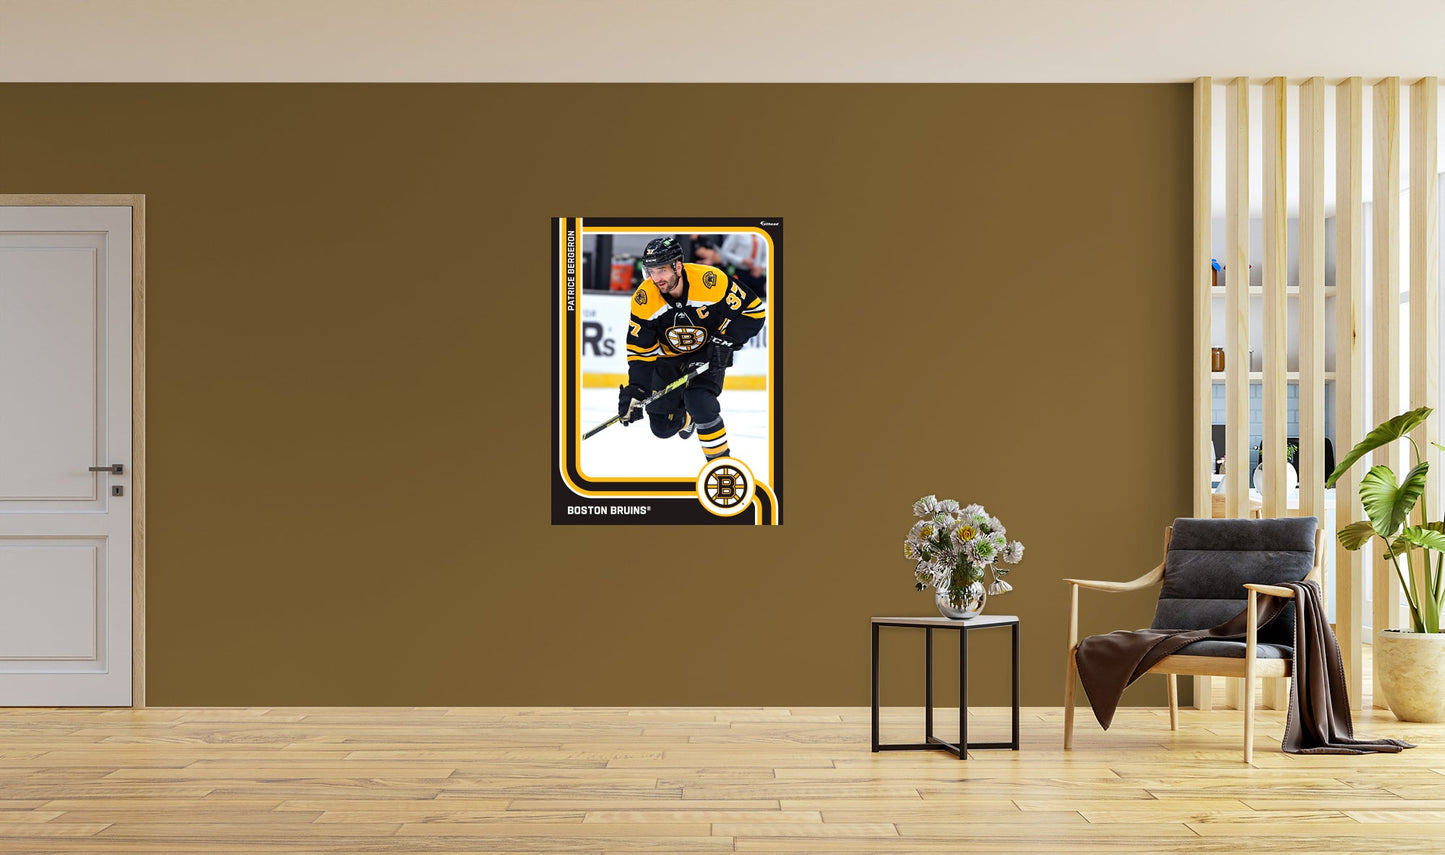 Boston Bruins: Patrice Bergeron Poster - Officially Licensed NHL Removable Adhesive Decal